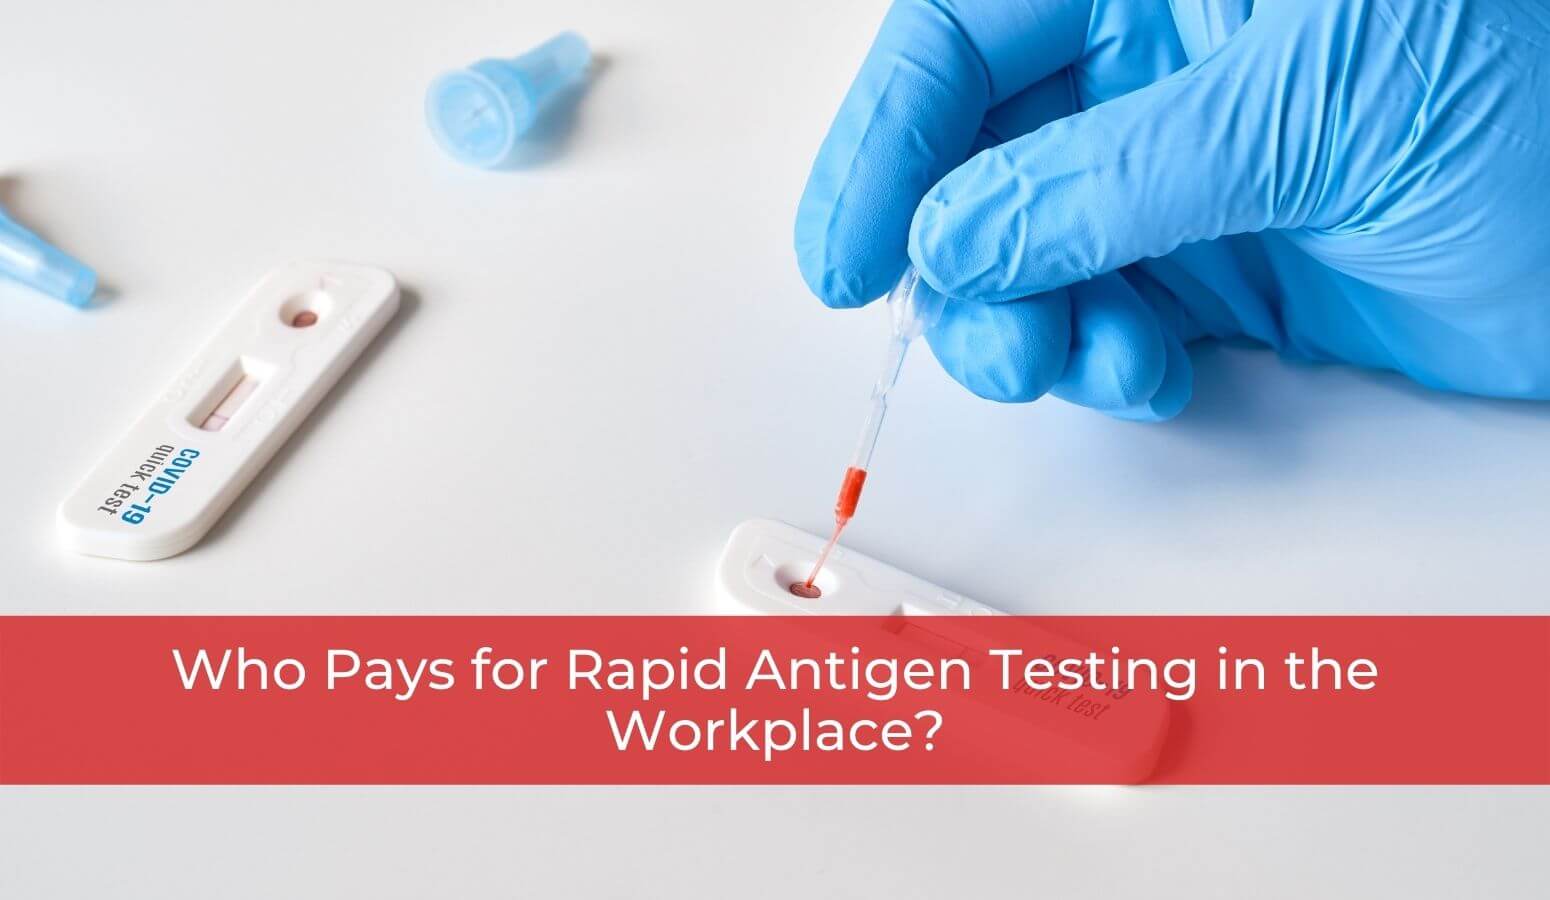 Rapid Antigen Testing in the Workplace - Jan 28 - Whitten & Lublin Employment Lawyers - Toronto Employment Lawyers - Severance Package Review - COVID-19